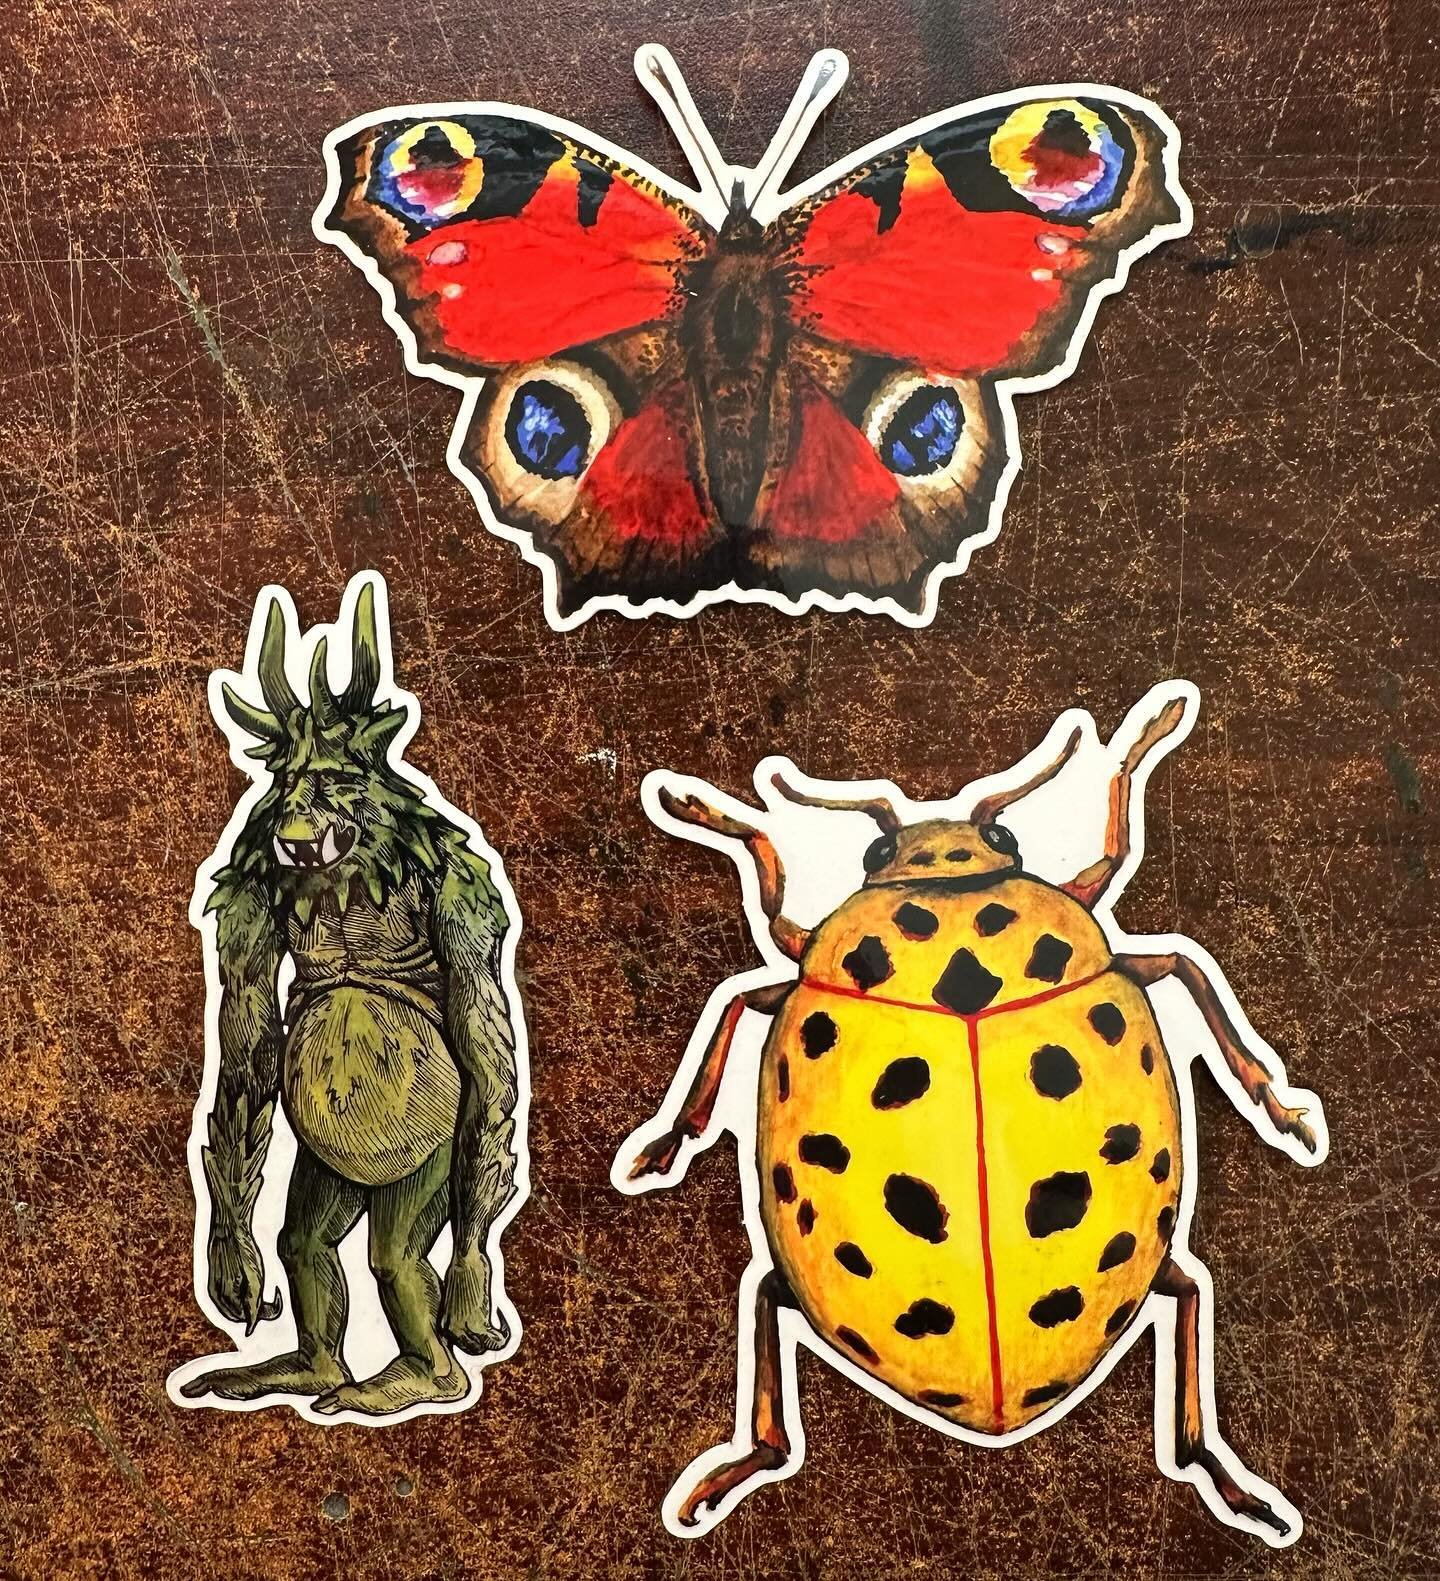 STICKERS!! 🐞🪲🧌
These are big beautiful vinyl stickers and I&rsquo;m very excited about them. 
I will have these at this month&rsquo;s BFF artist market!